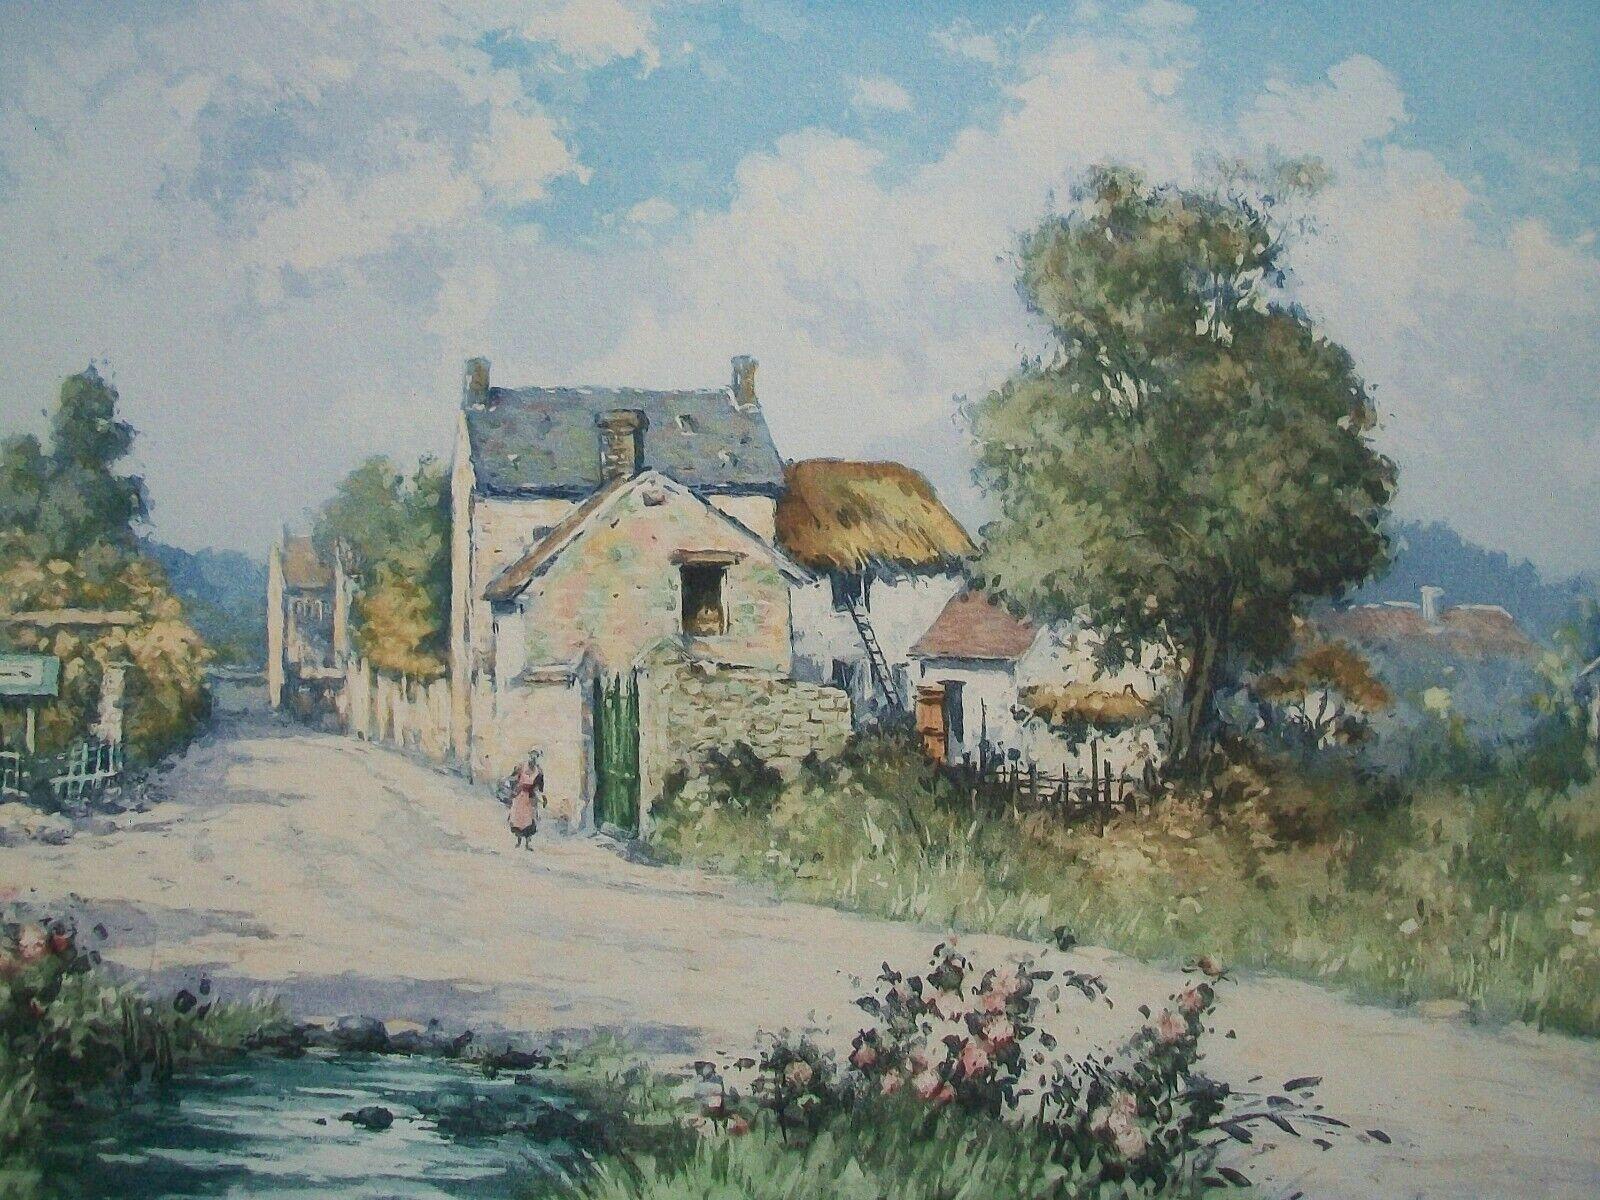 Manuel Robbe (1872-1936) - 'Entrance to Village' (Brittany) - Impressionist etching with aquatint on paper (mounted to card) - featuring a lone figure of a woman and houses within a village landscape - signed in pencil lower right - prominent